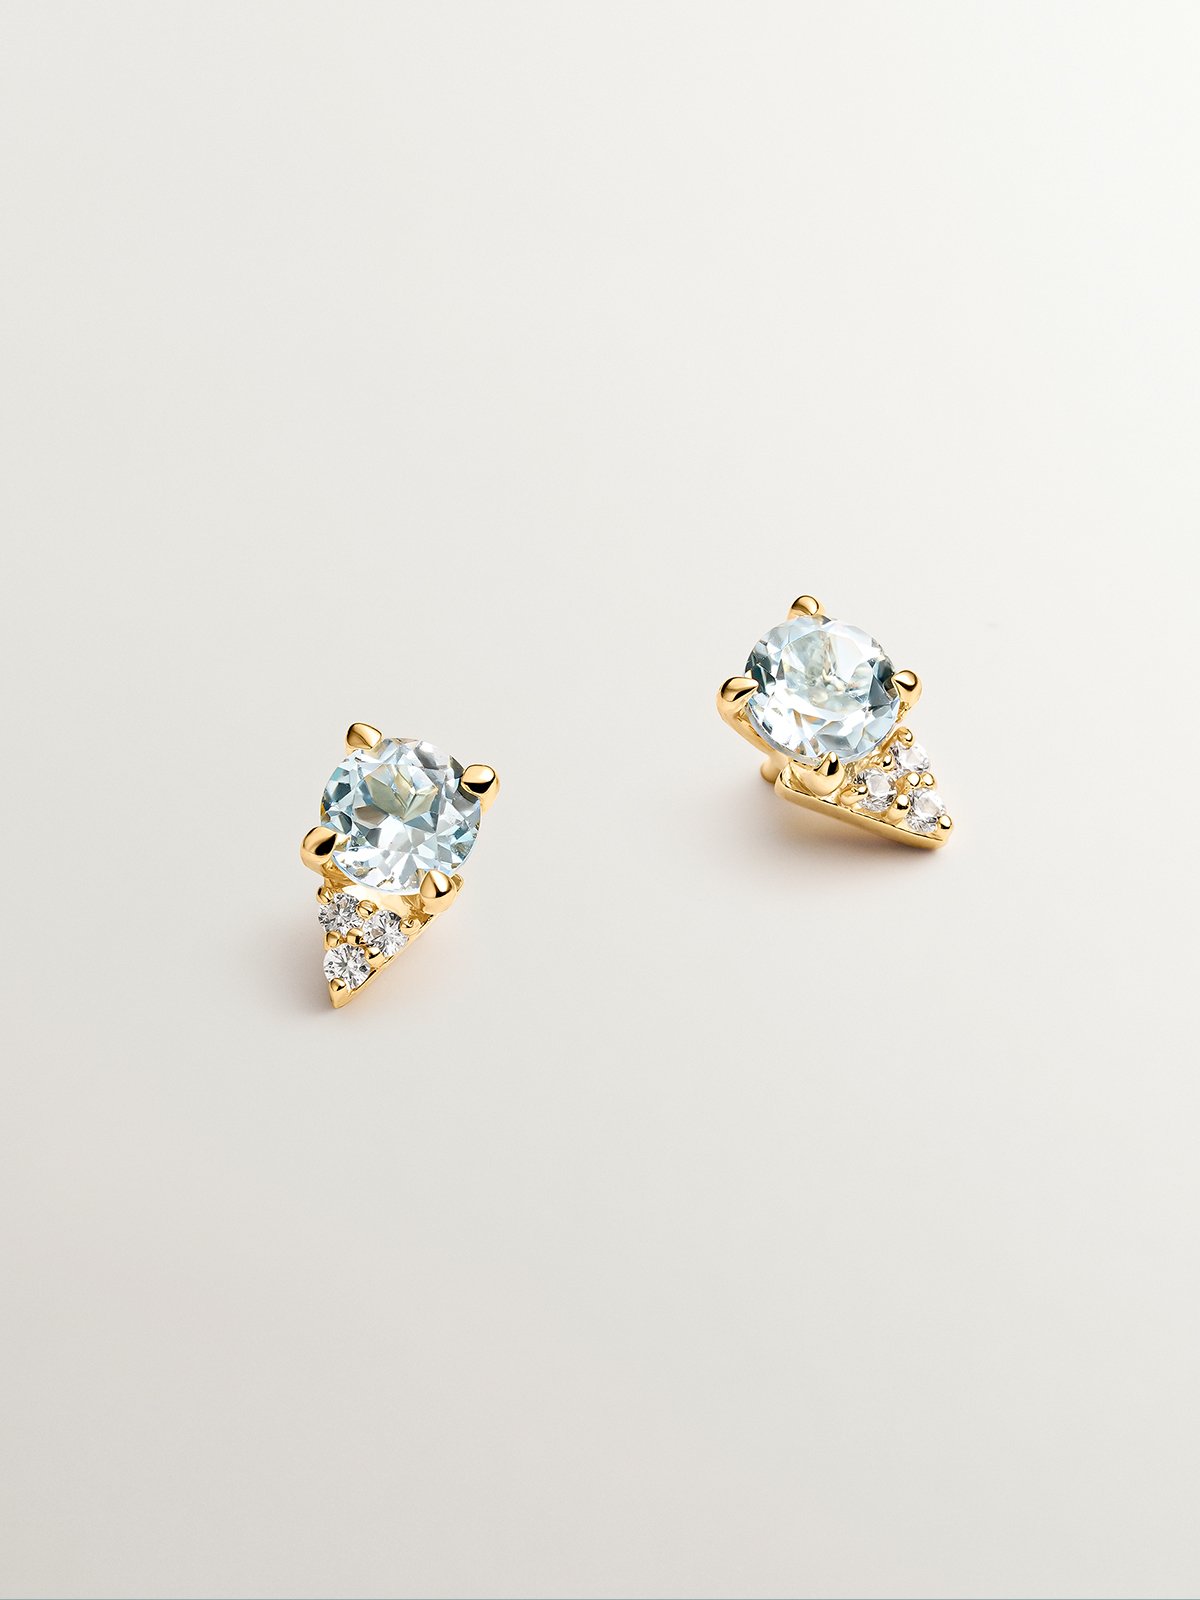 925 Silver earrings bathed in 18K yellow gold with sky blue topaz and white sapphires.